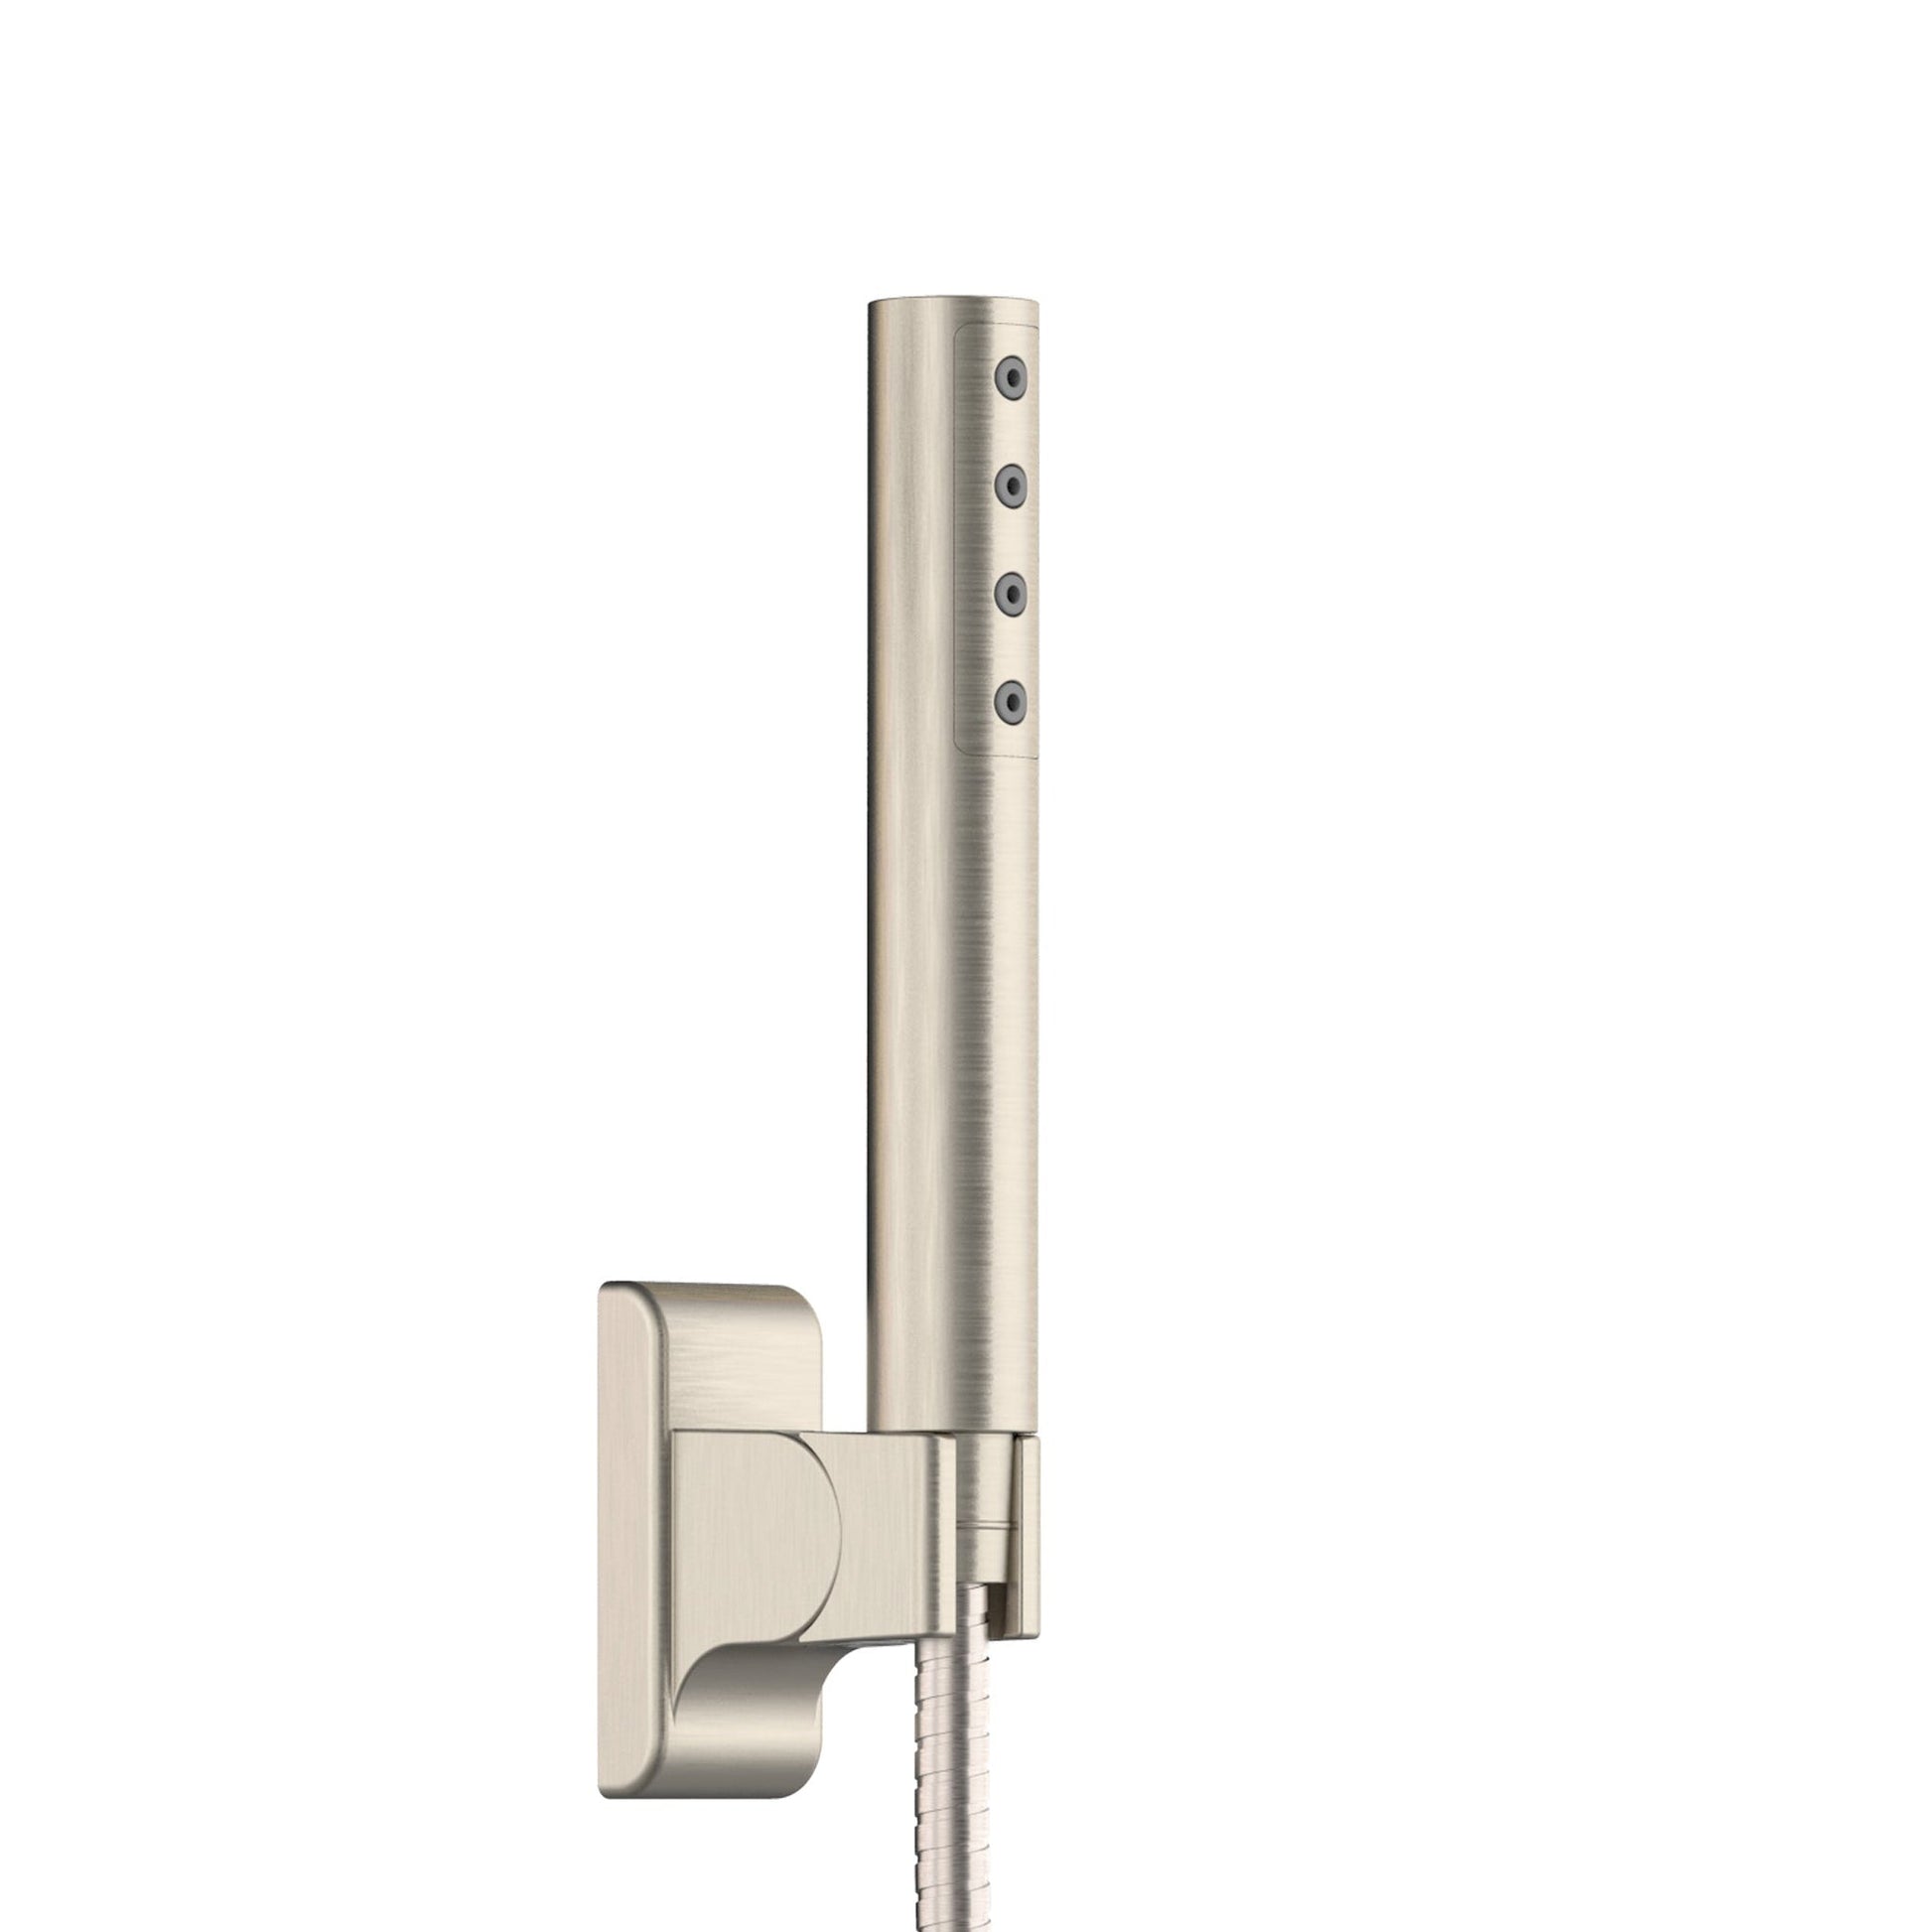 PULSE ShowerSpas Atlantis 1.8 GPM Rain Shower System in Brushed Nickel Finish With 5-Power Nozzle Spray and Single Function Hand Shower